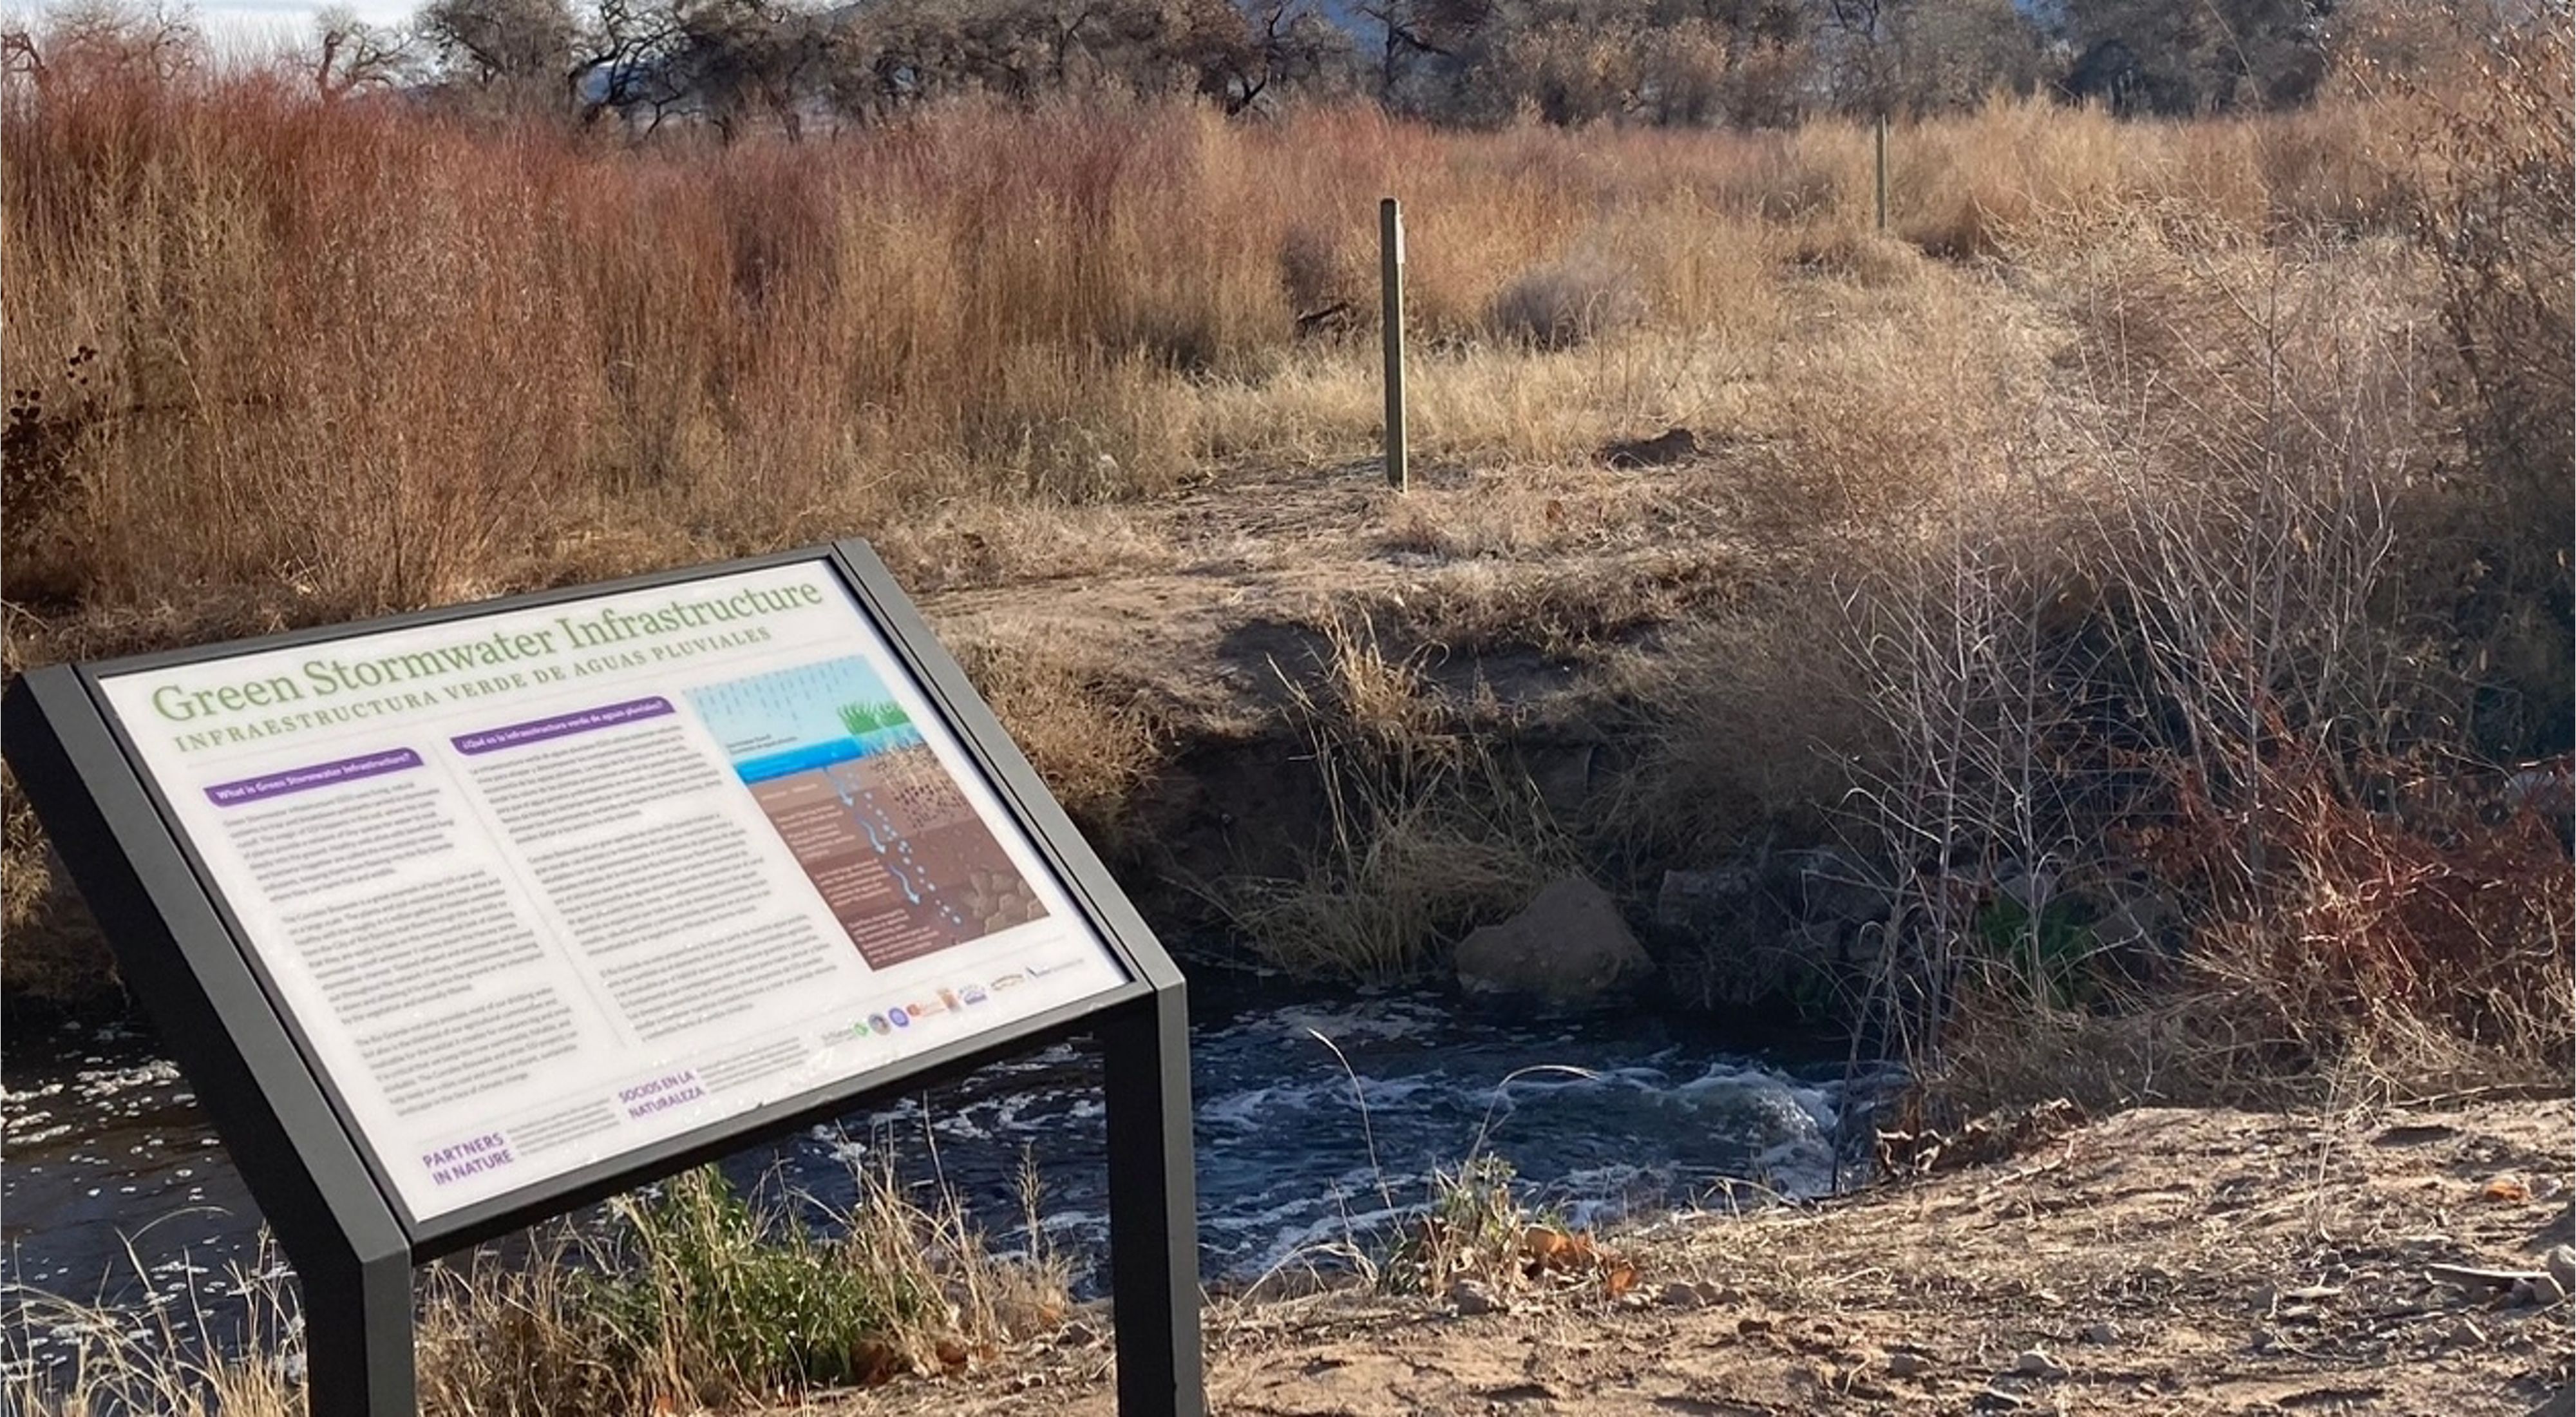 Closeup of an interpretive sign amid a scrubby landscape; the sign describes green stormwater infrastructure.